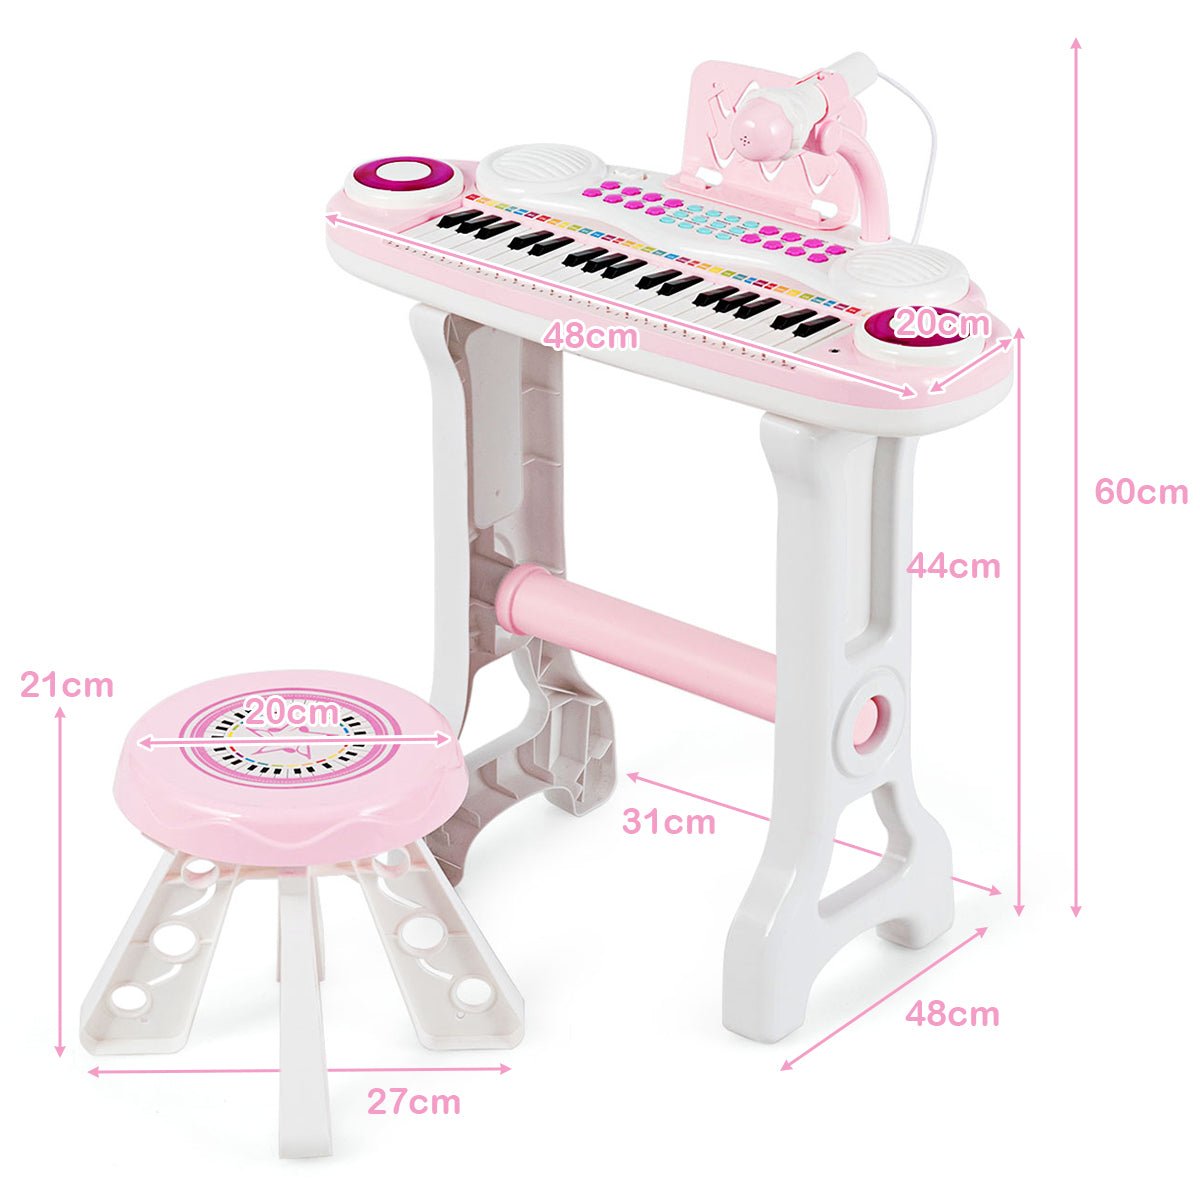 Creative Keyboards: 37-Key Electronic Kids Piano with Stool & Microphone